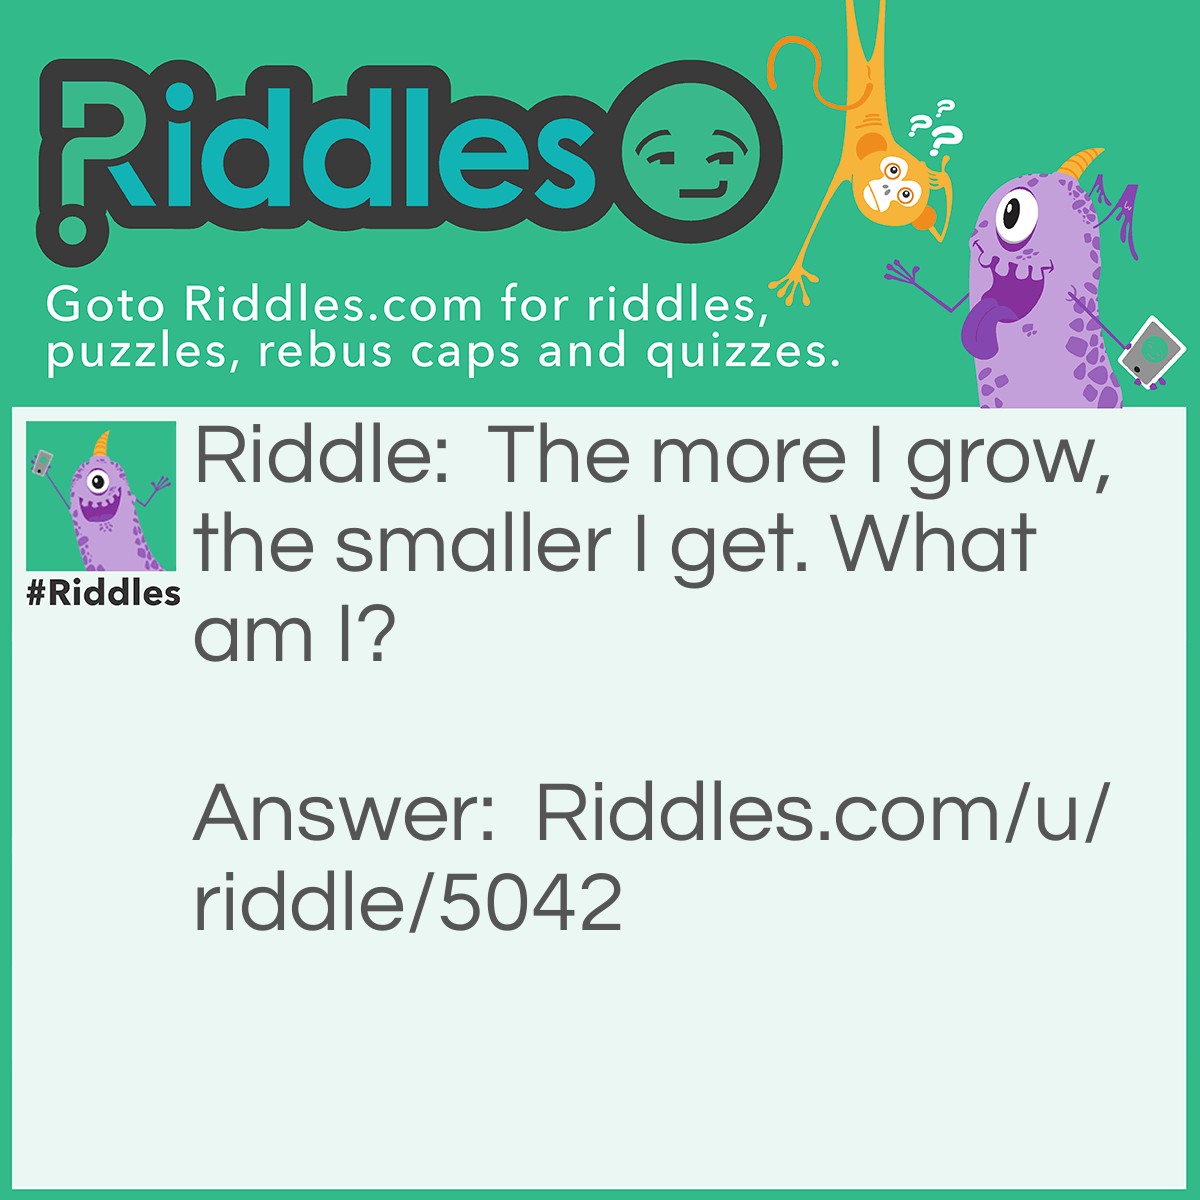 Riddle: The more I grow, the smaller I get. What am I? Answer: A candle.